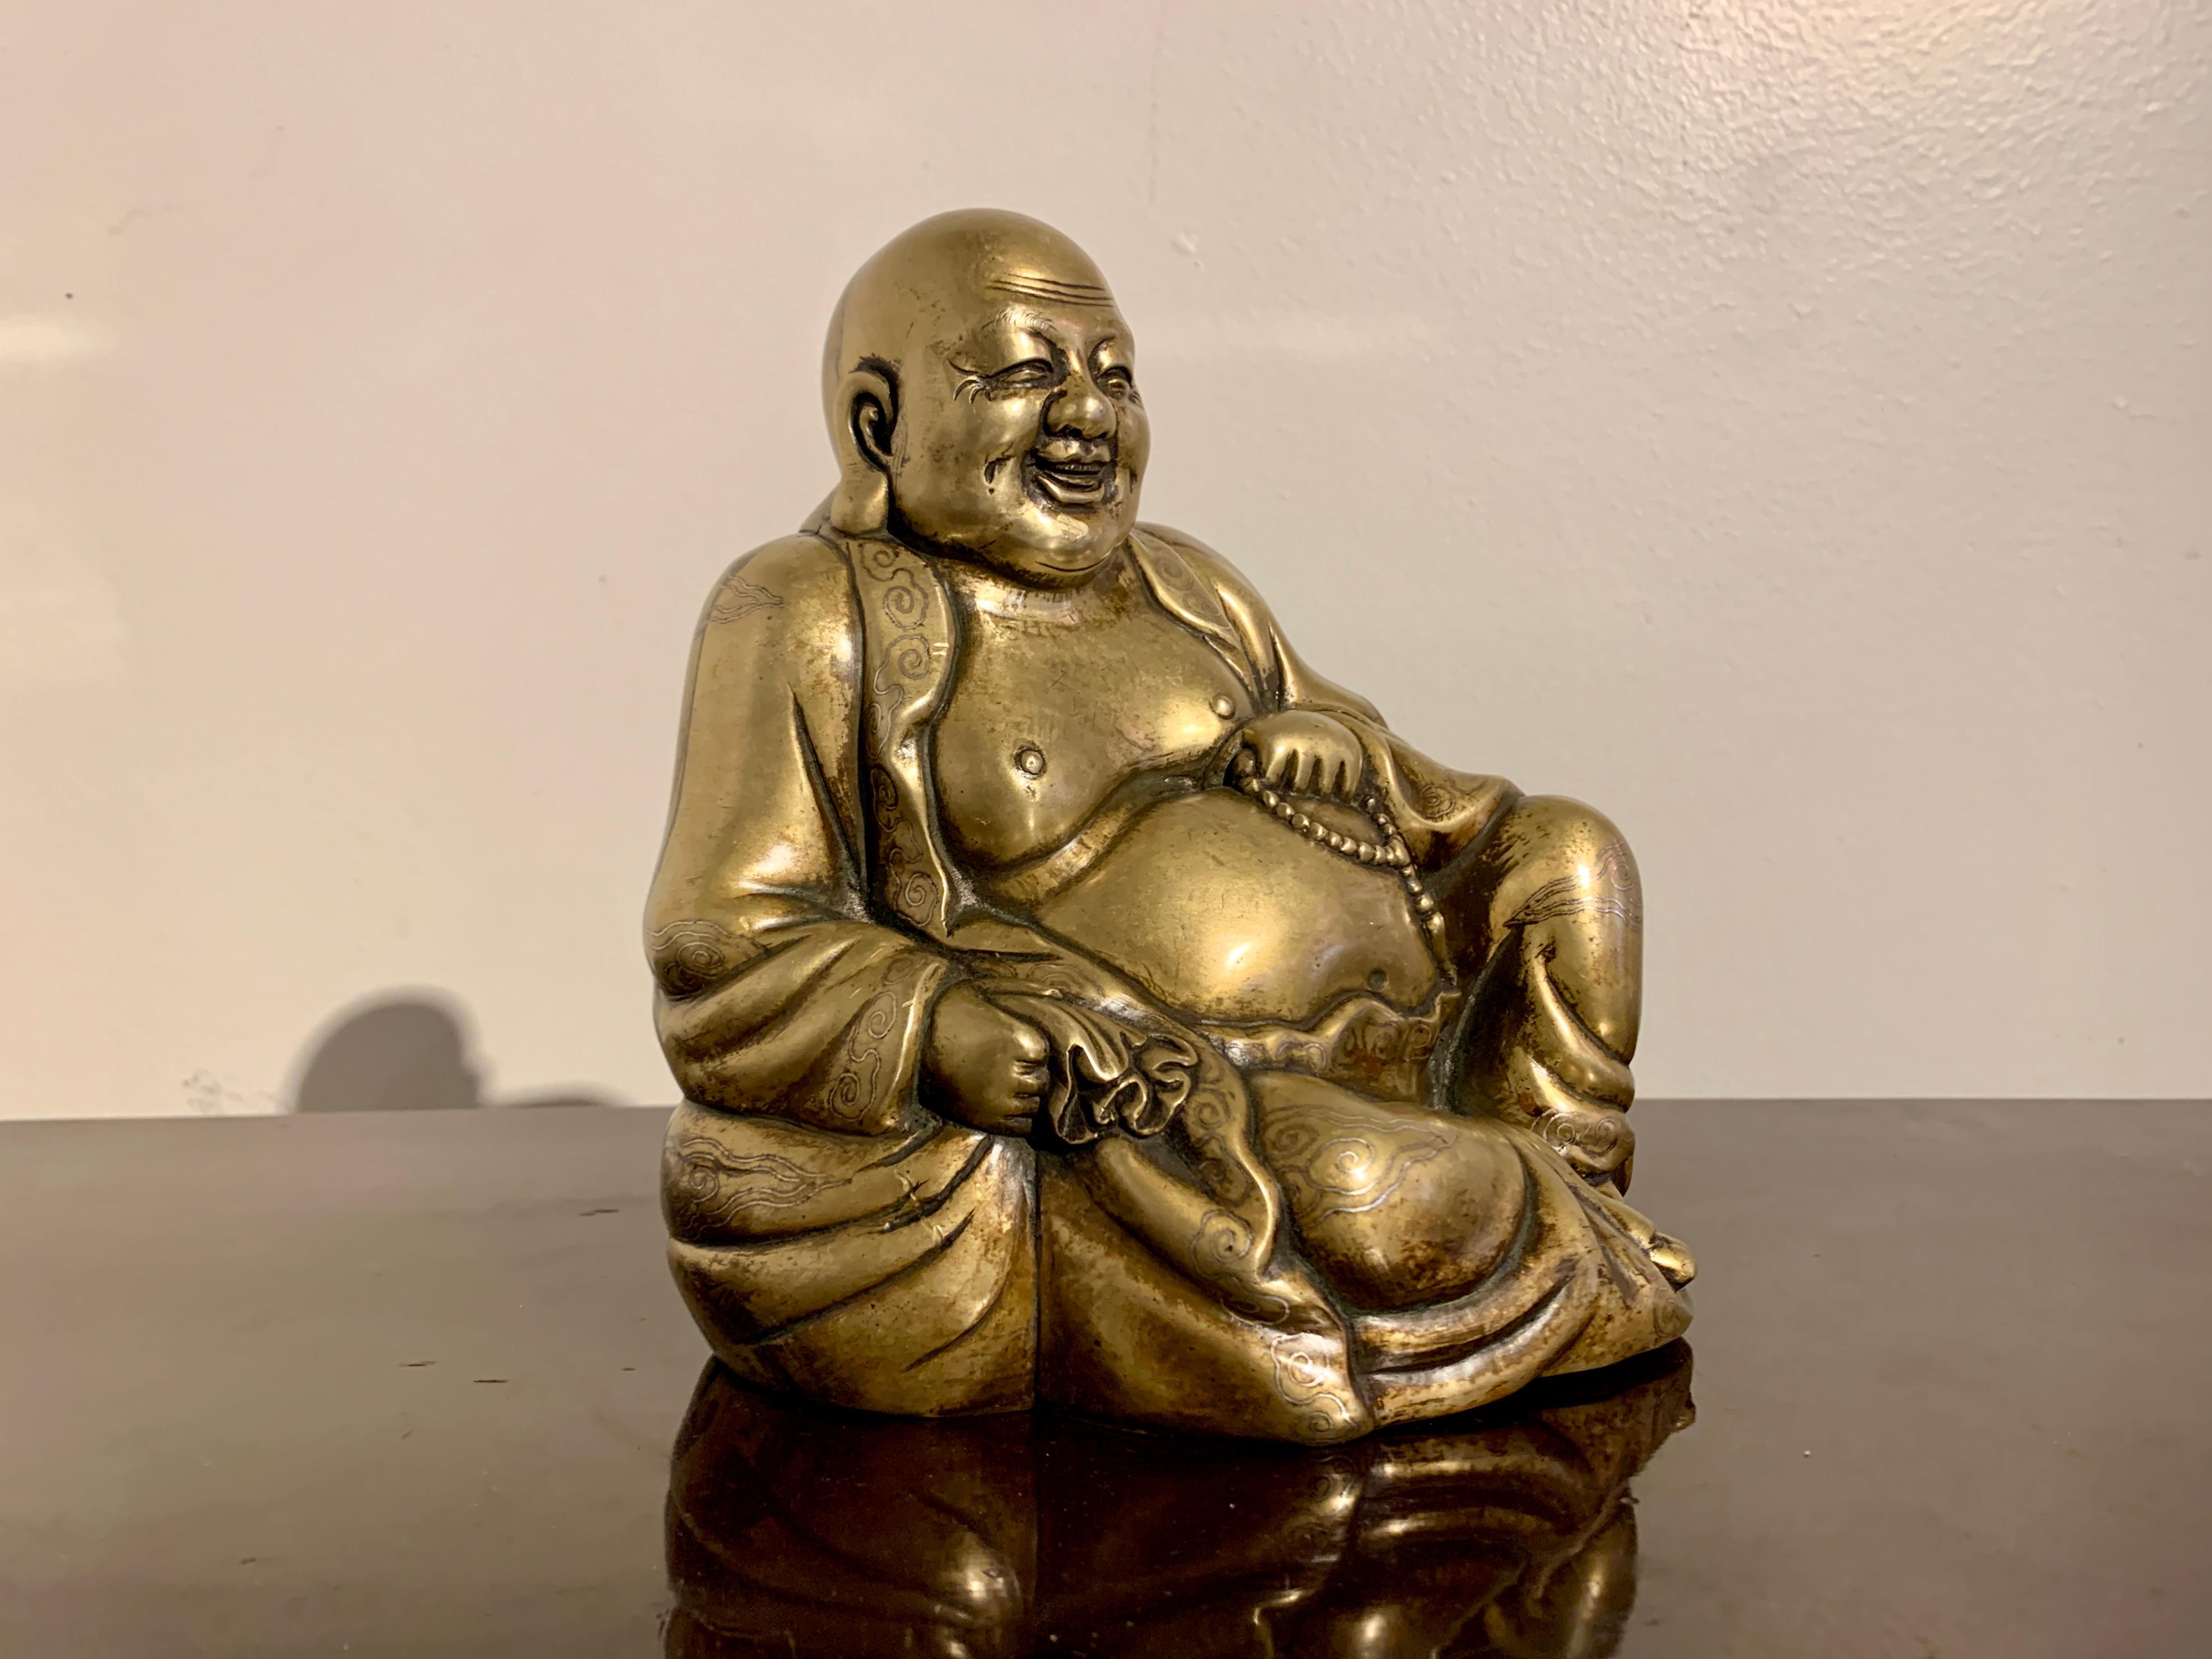 A delightful heavily cast Chinese brass and silver inlaid figure of Budai, the Laughing Buddha, inlaid Shishou mark, Qing Dynasty, 19th century or earlier, China.

Budai, often referred to as the Happy Buddha, Laughing Buddha, or Fat Buddha, is a